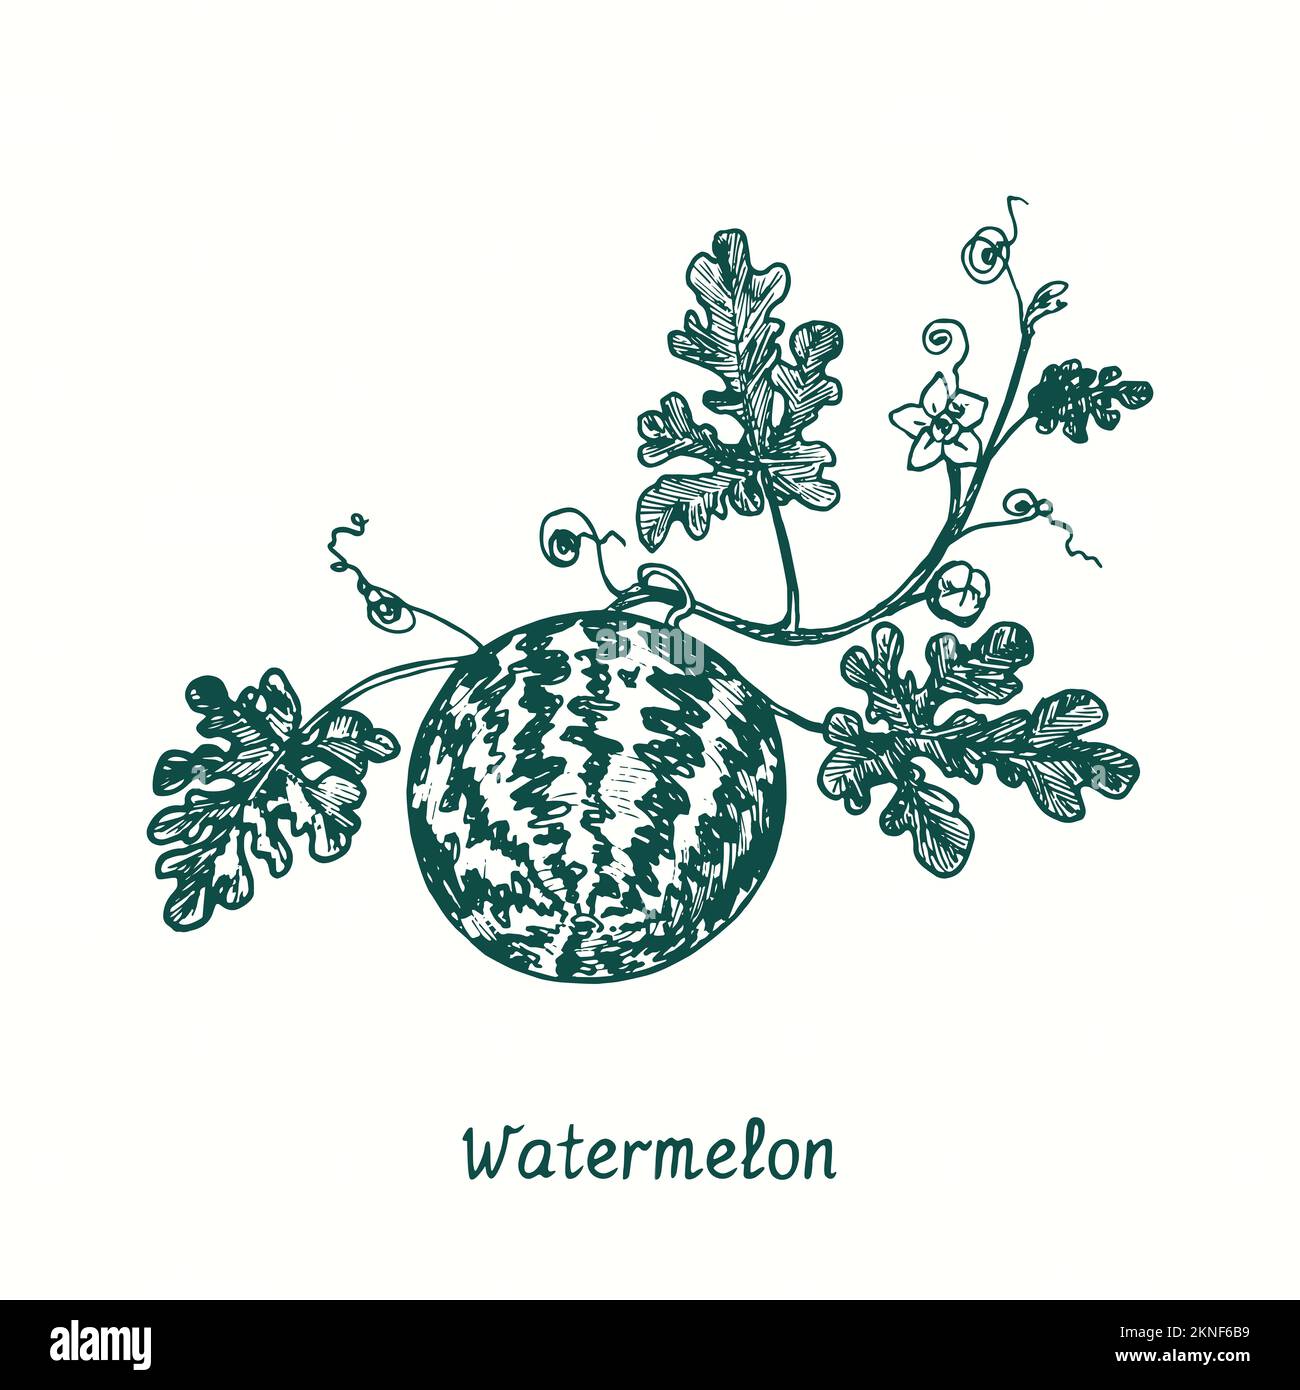 Watermelon (Citrullus lanatus) plant with leaves and ripe striped berry. Ink black and white doodle drawing in woodcut style Stock Photo